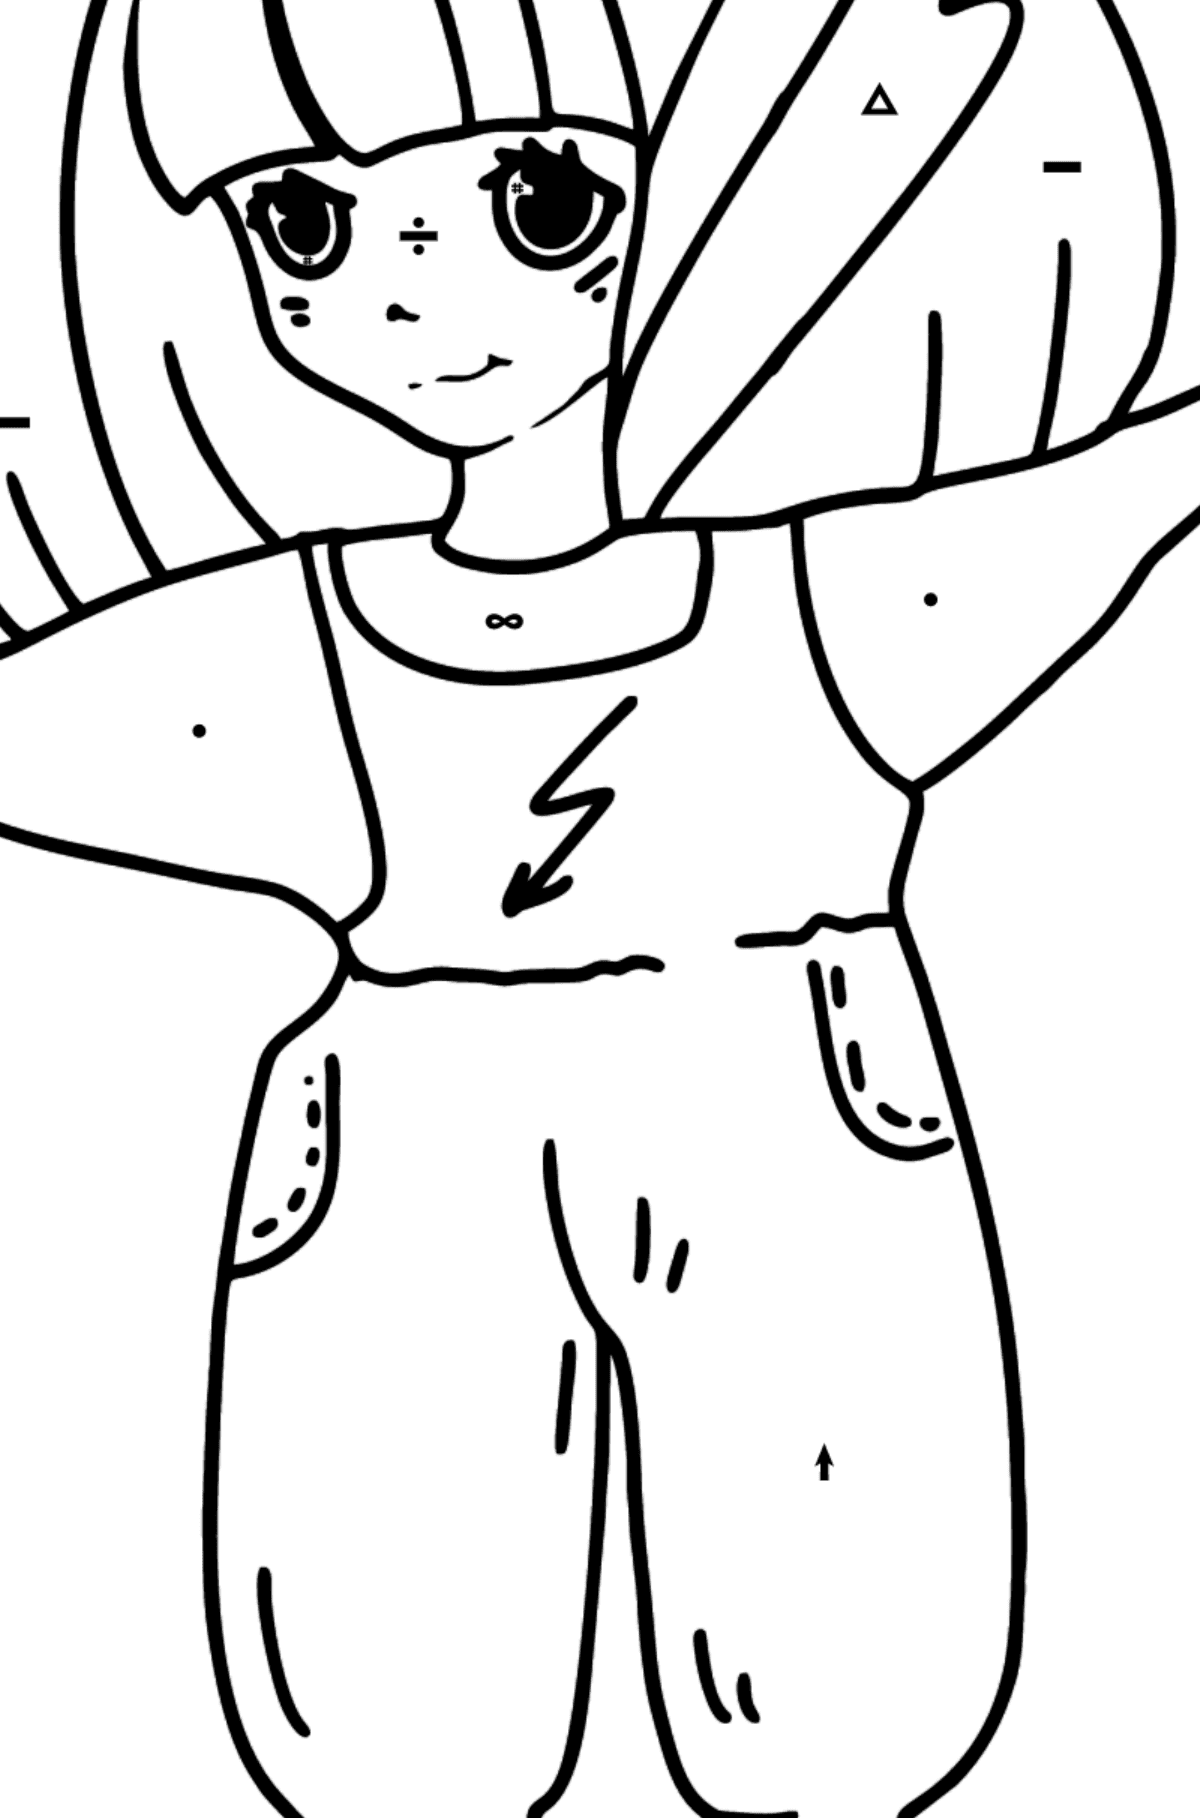 Thunder Anime Girl Coloring Pages - Coloring by Symbols for Kids